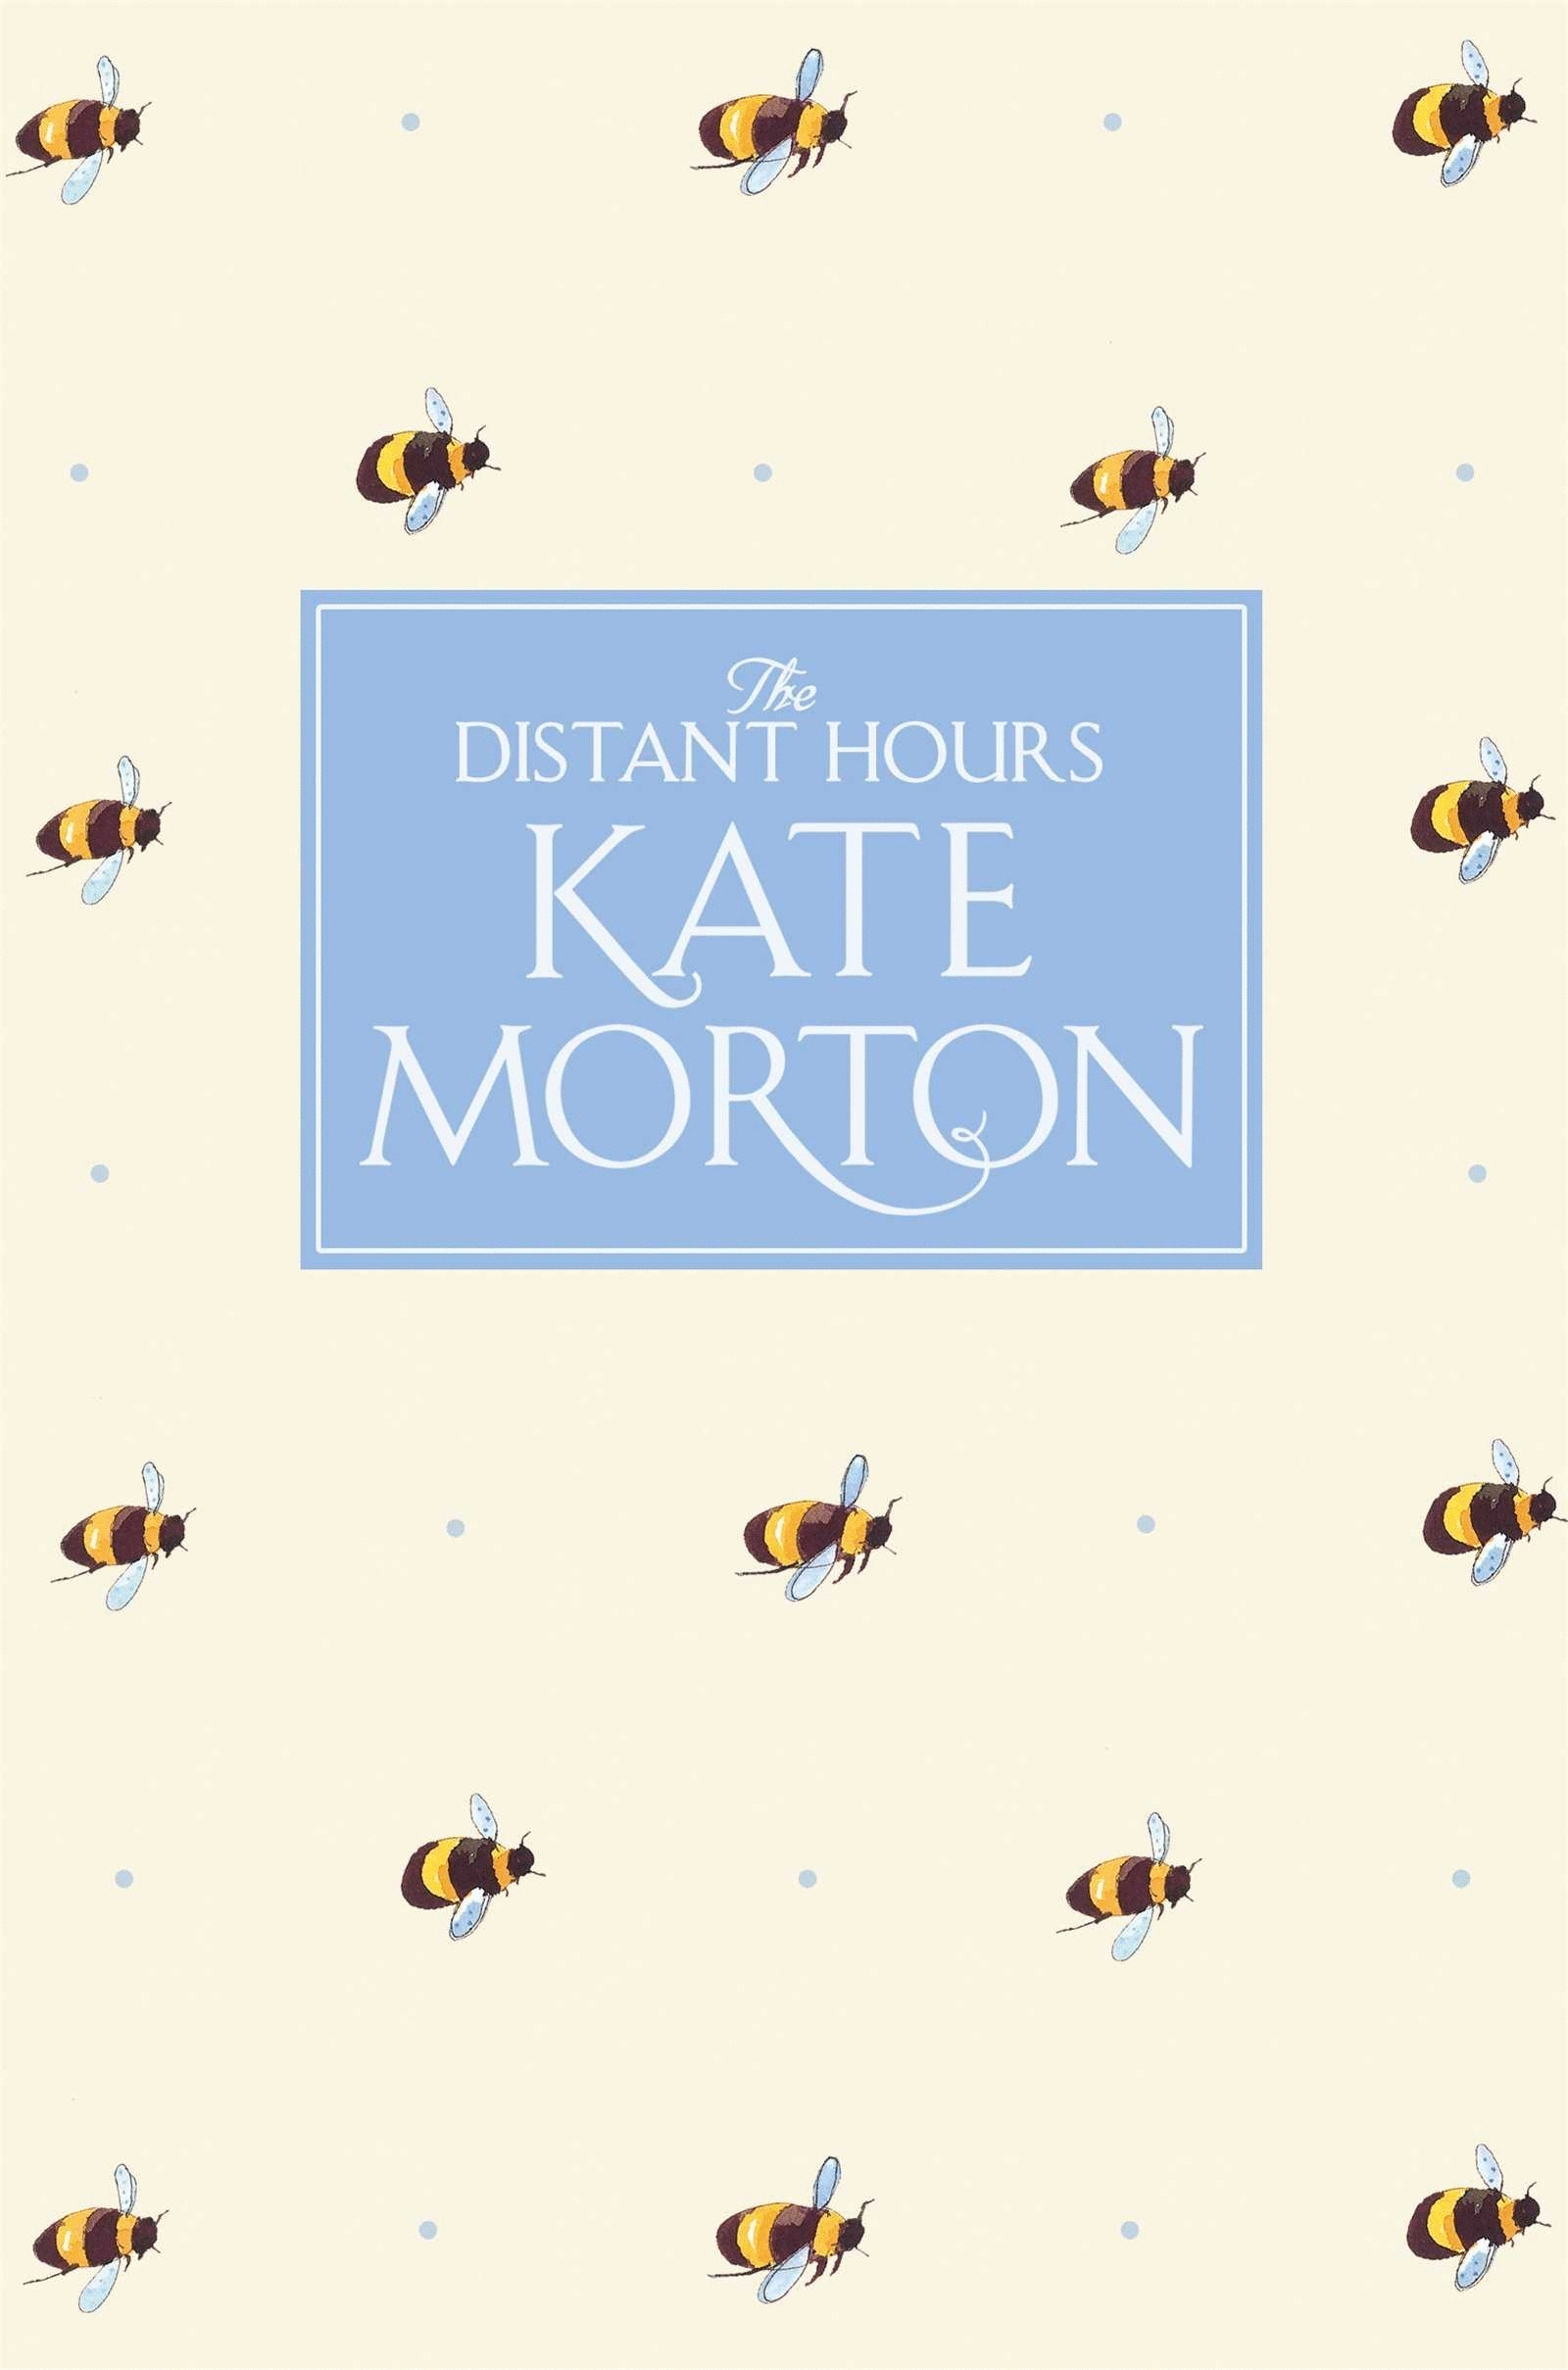 DISTANT HOURS